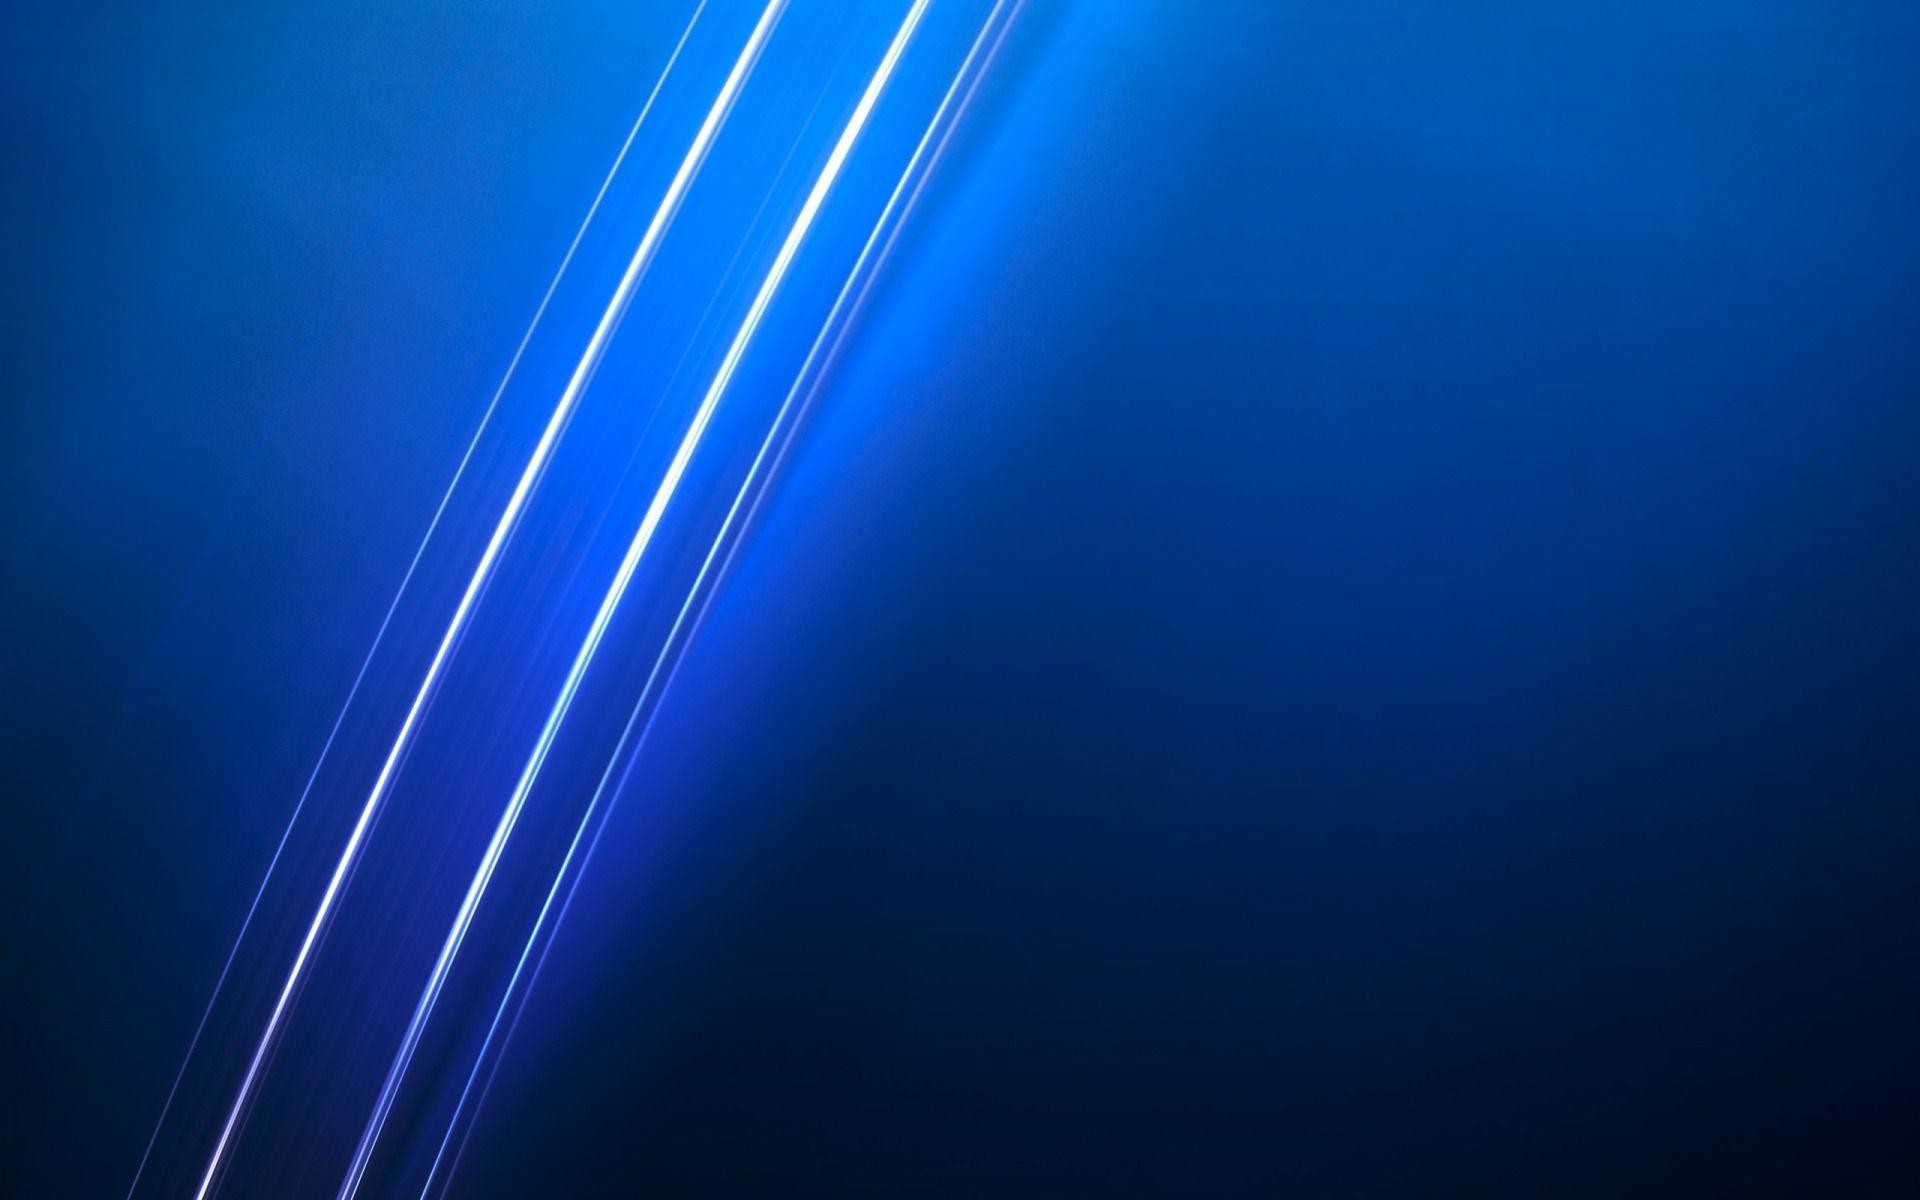 1920x1200 Abstract Blue Wallpaper Hd Images 3 HD Wallpapers | lzamgs.